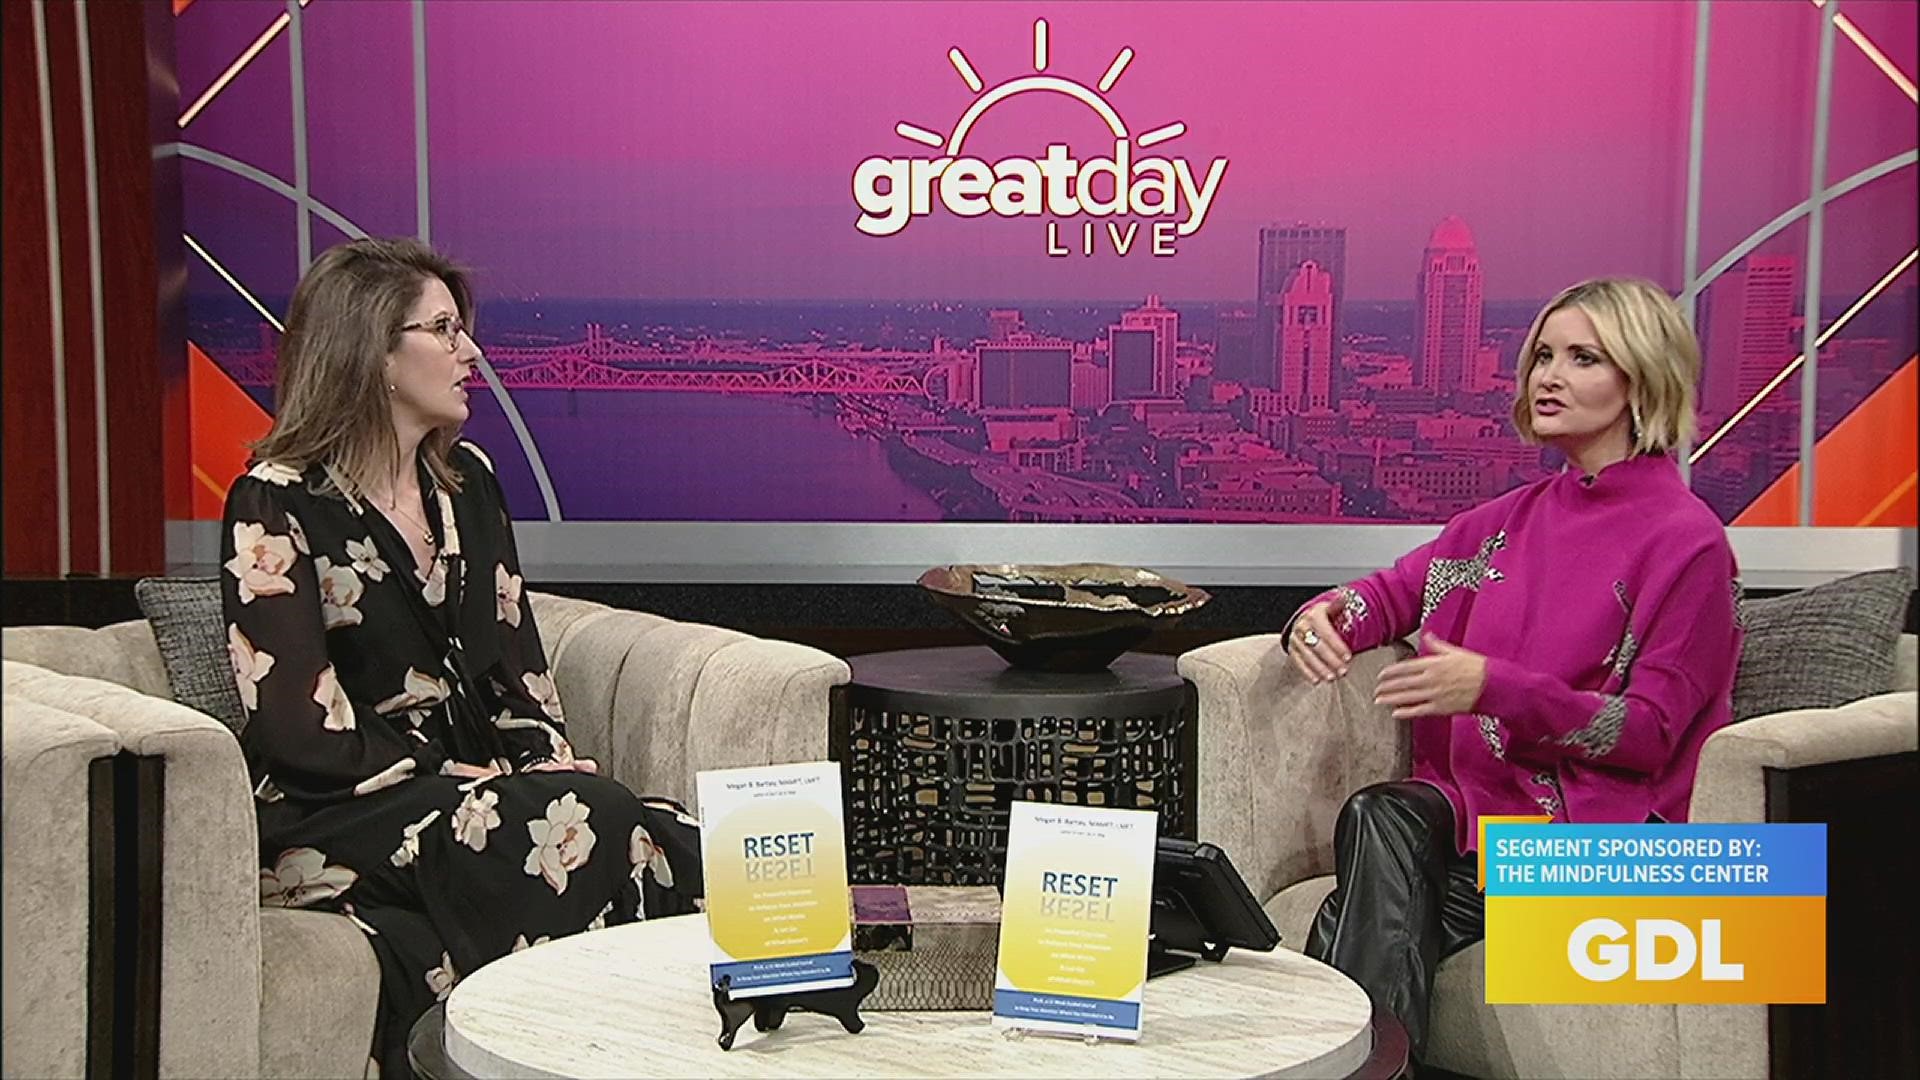 The Mindfulness Center on Great Day Live!